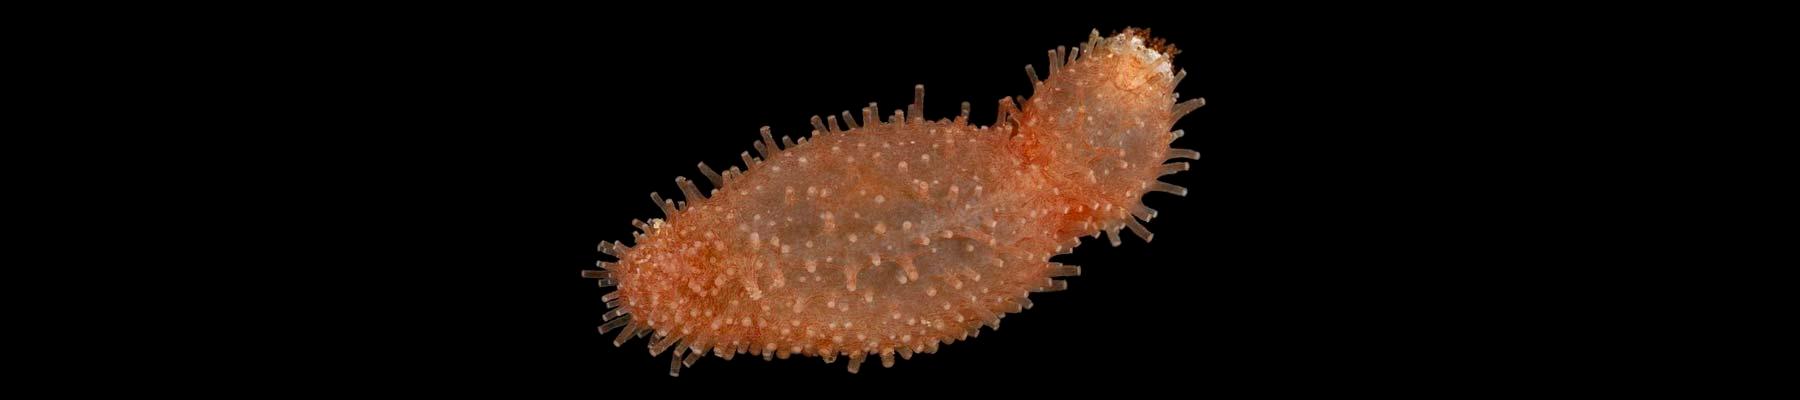 Lipotrapeza vestiens, one of the sea cucumber species proposed for possible CITES listing © Catching The Eye / CC BY-NC 2.0